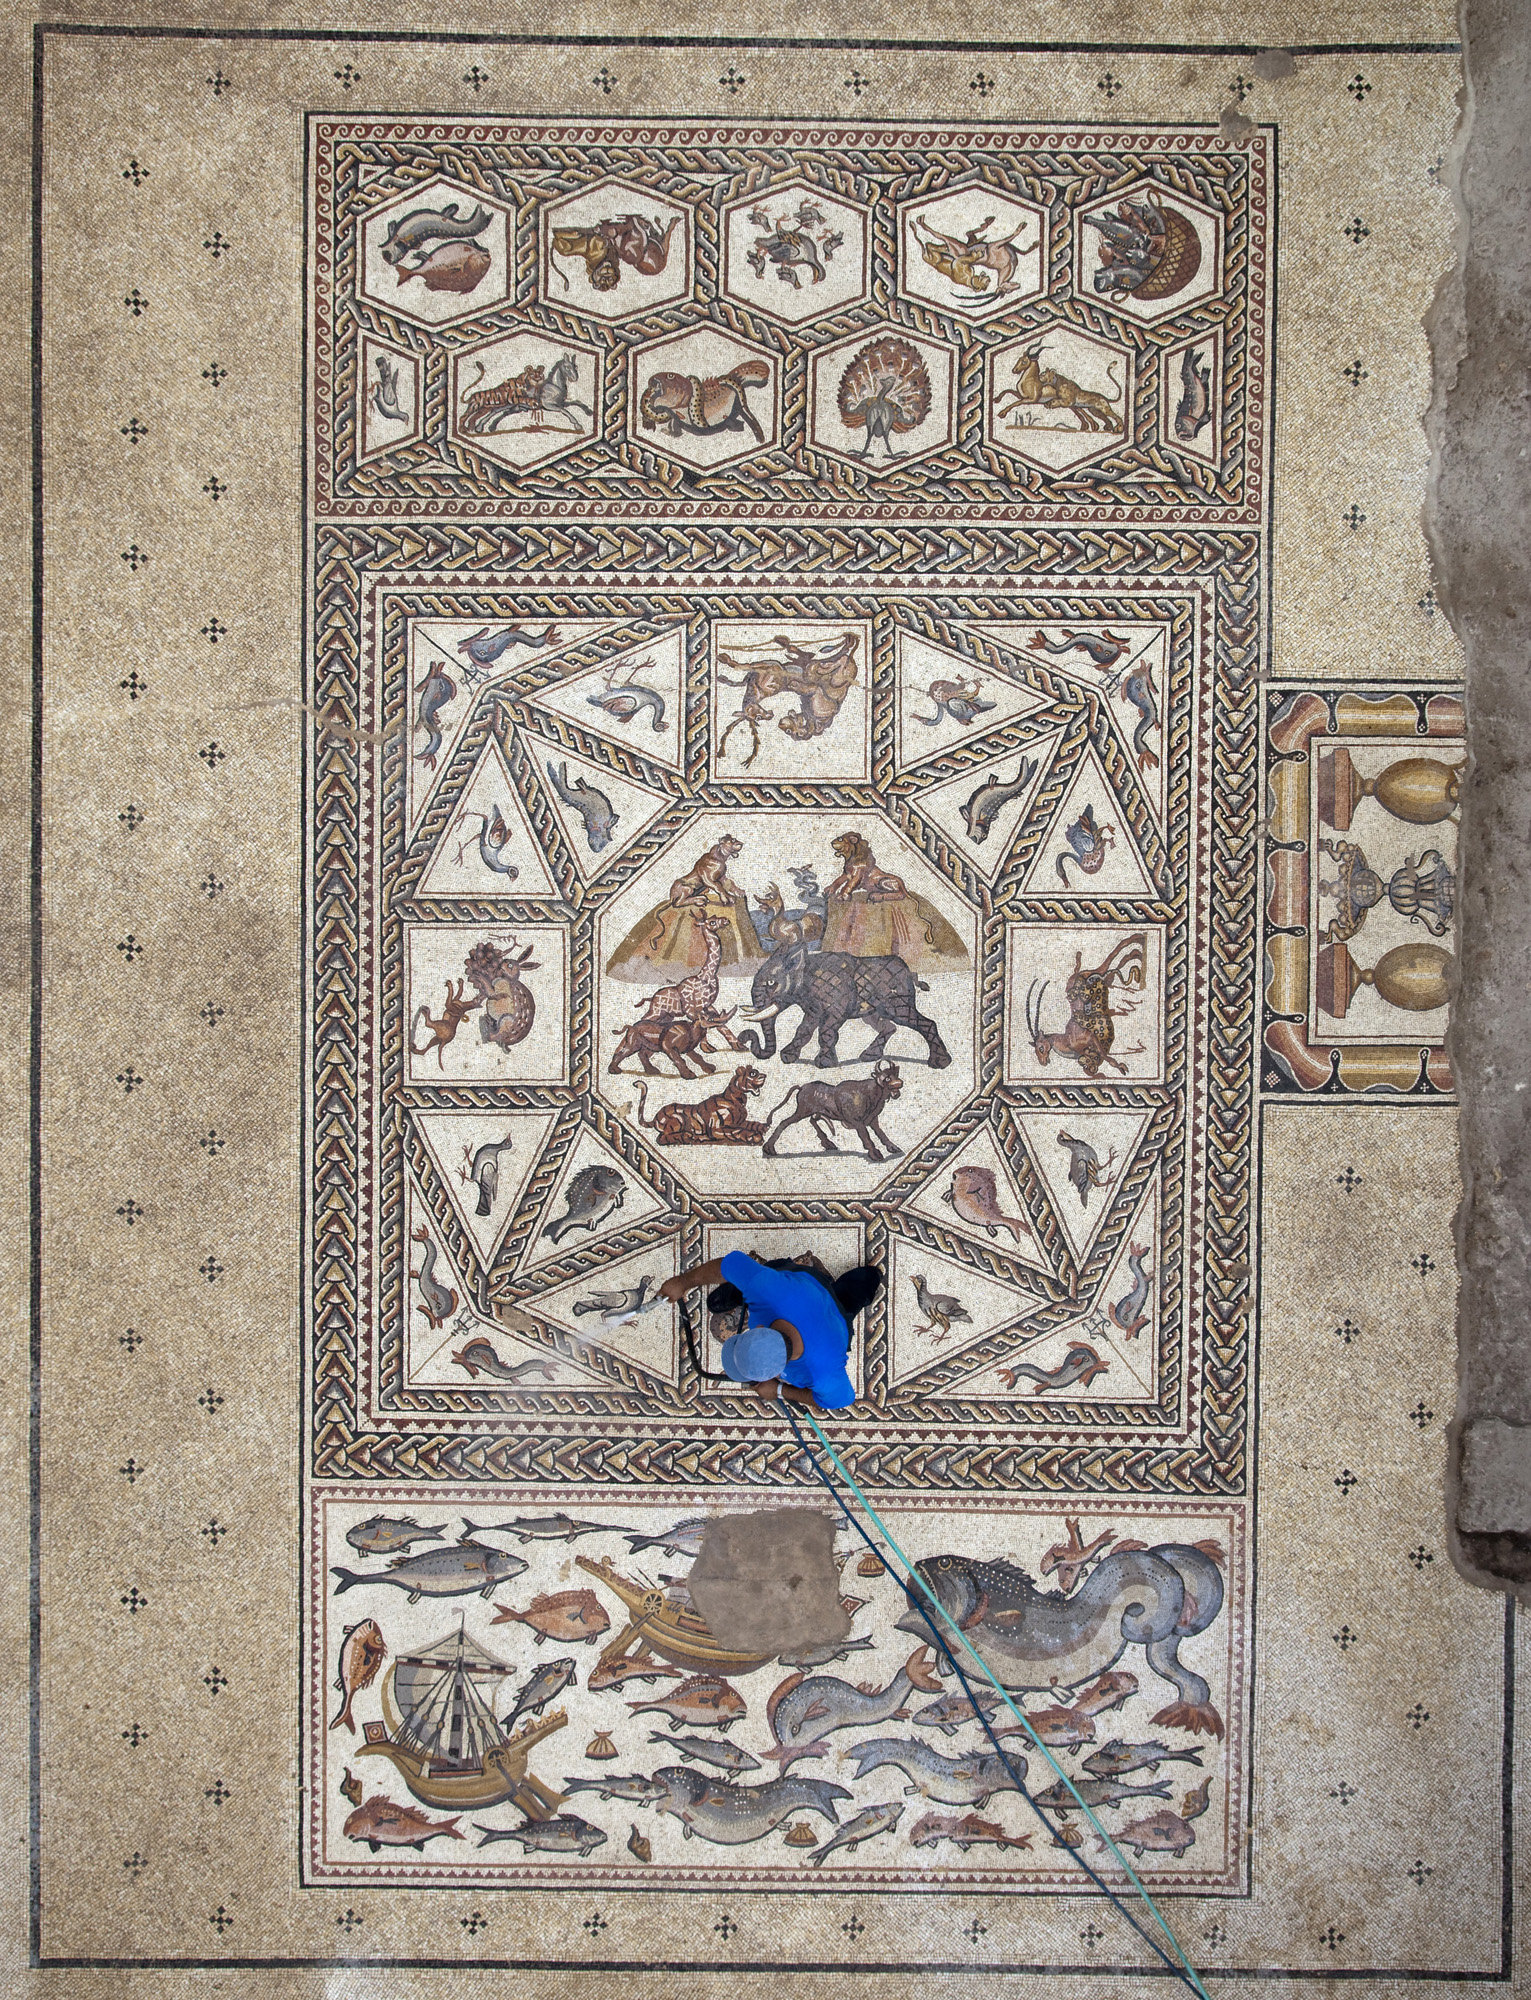 http://www.thehistoryblog.com/wp-content/uploads/2013/02/Lod-mosaic-cleaned-in-situ.jpg